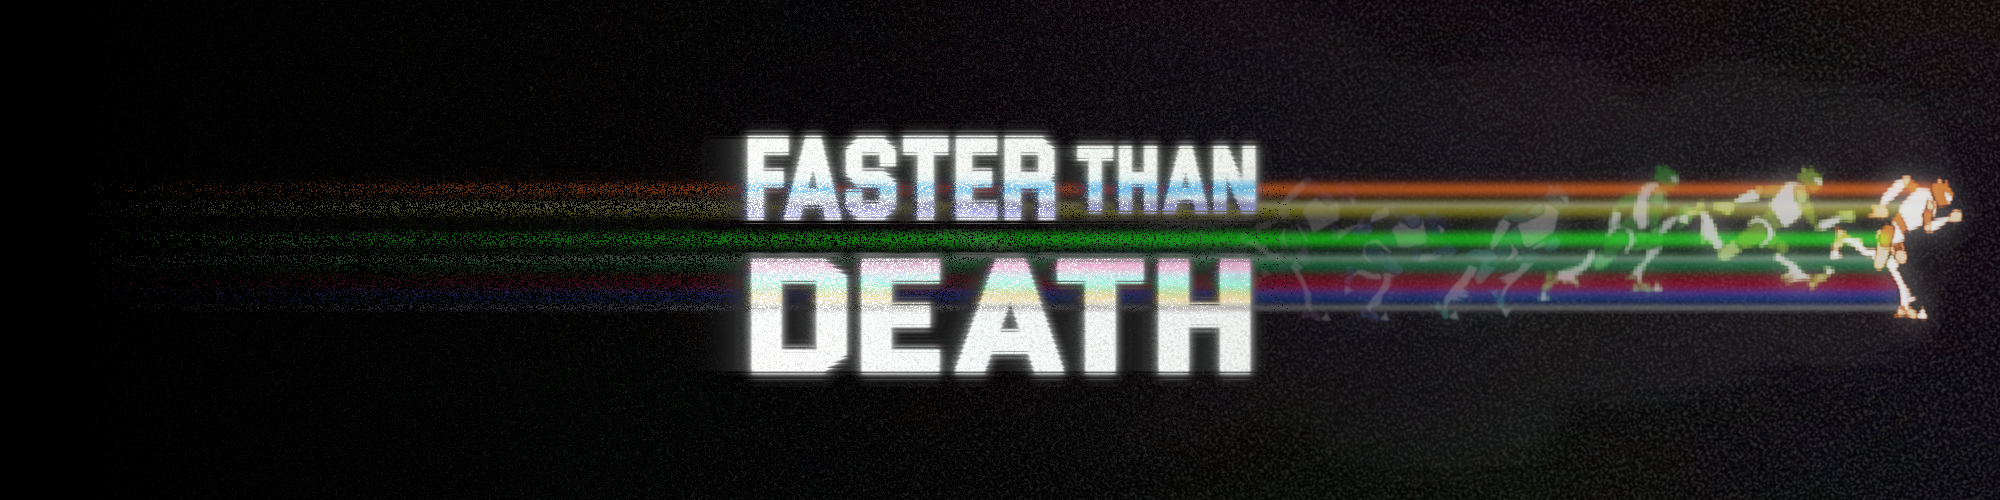 Faster Than Death